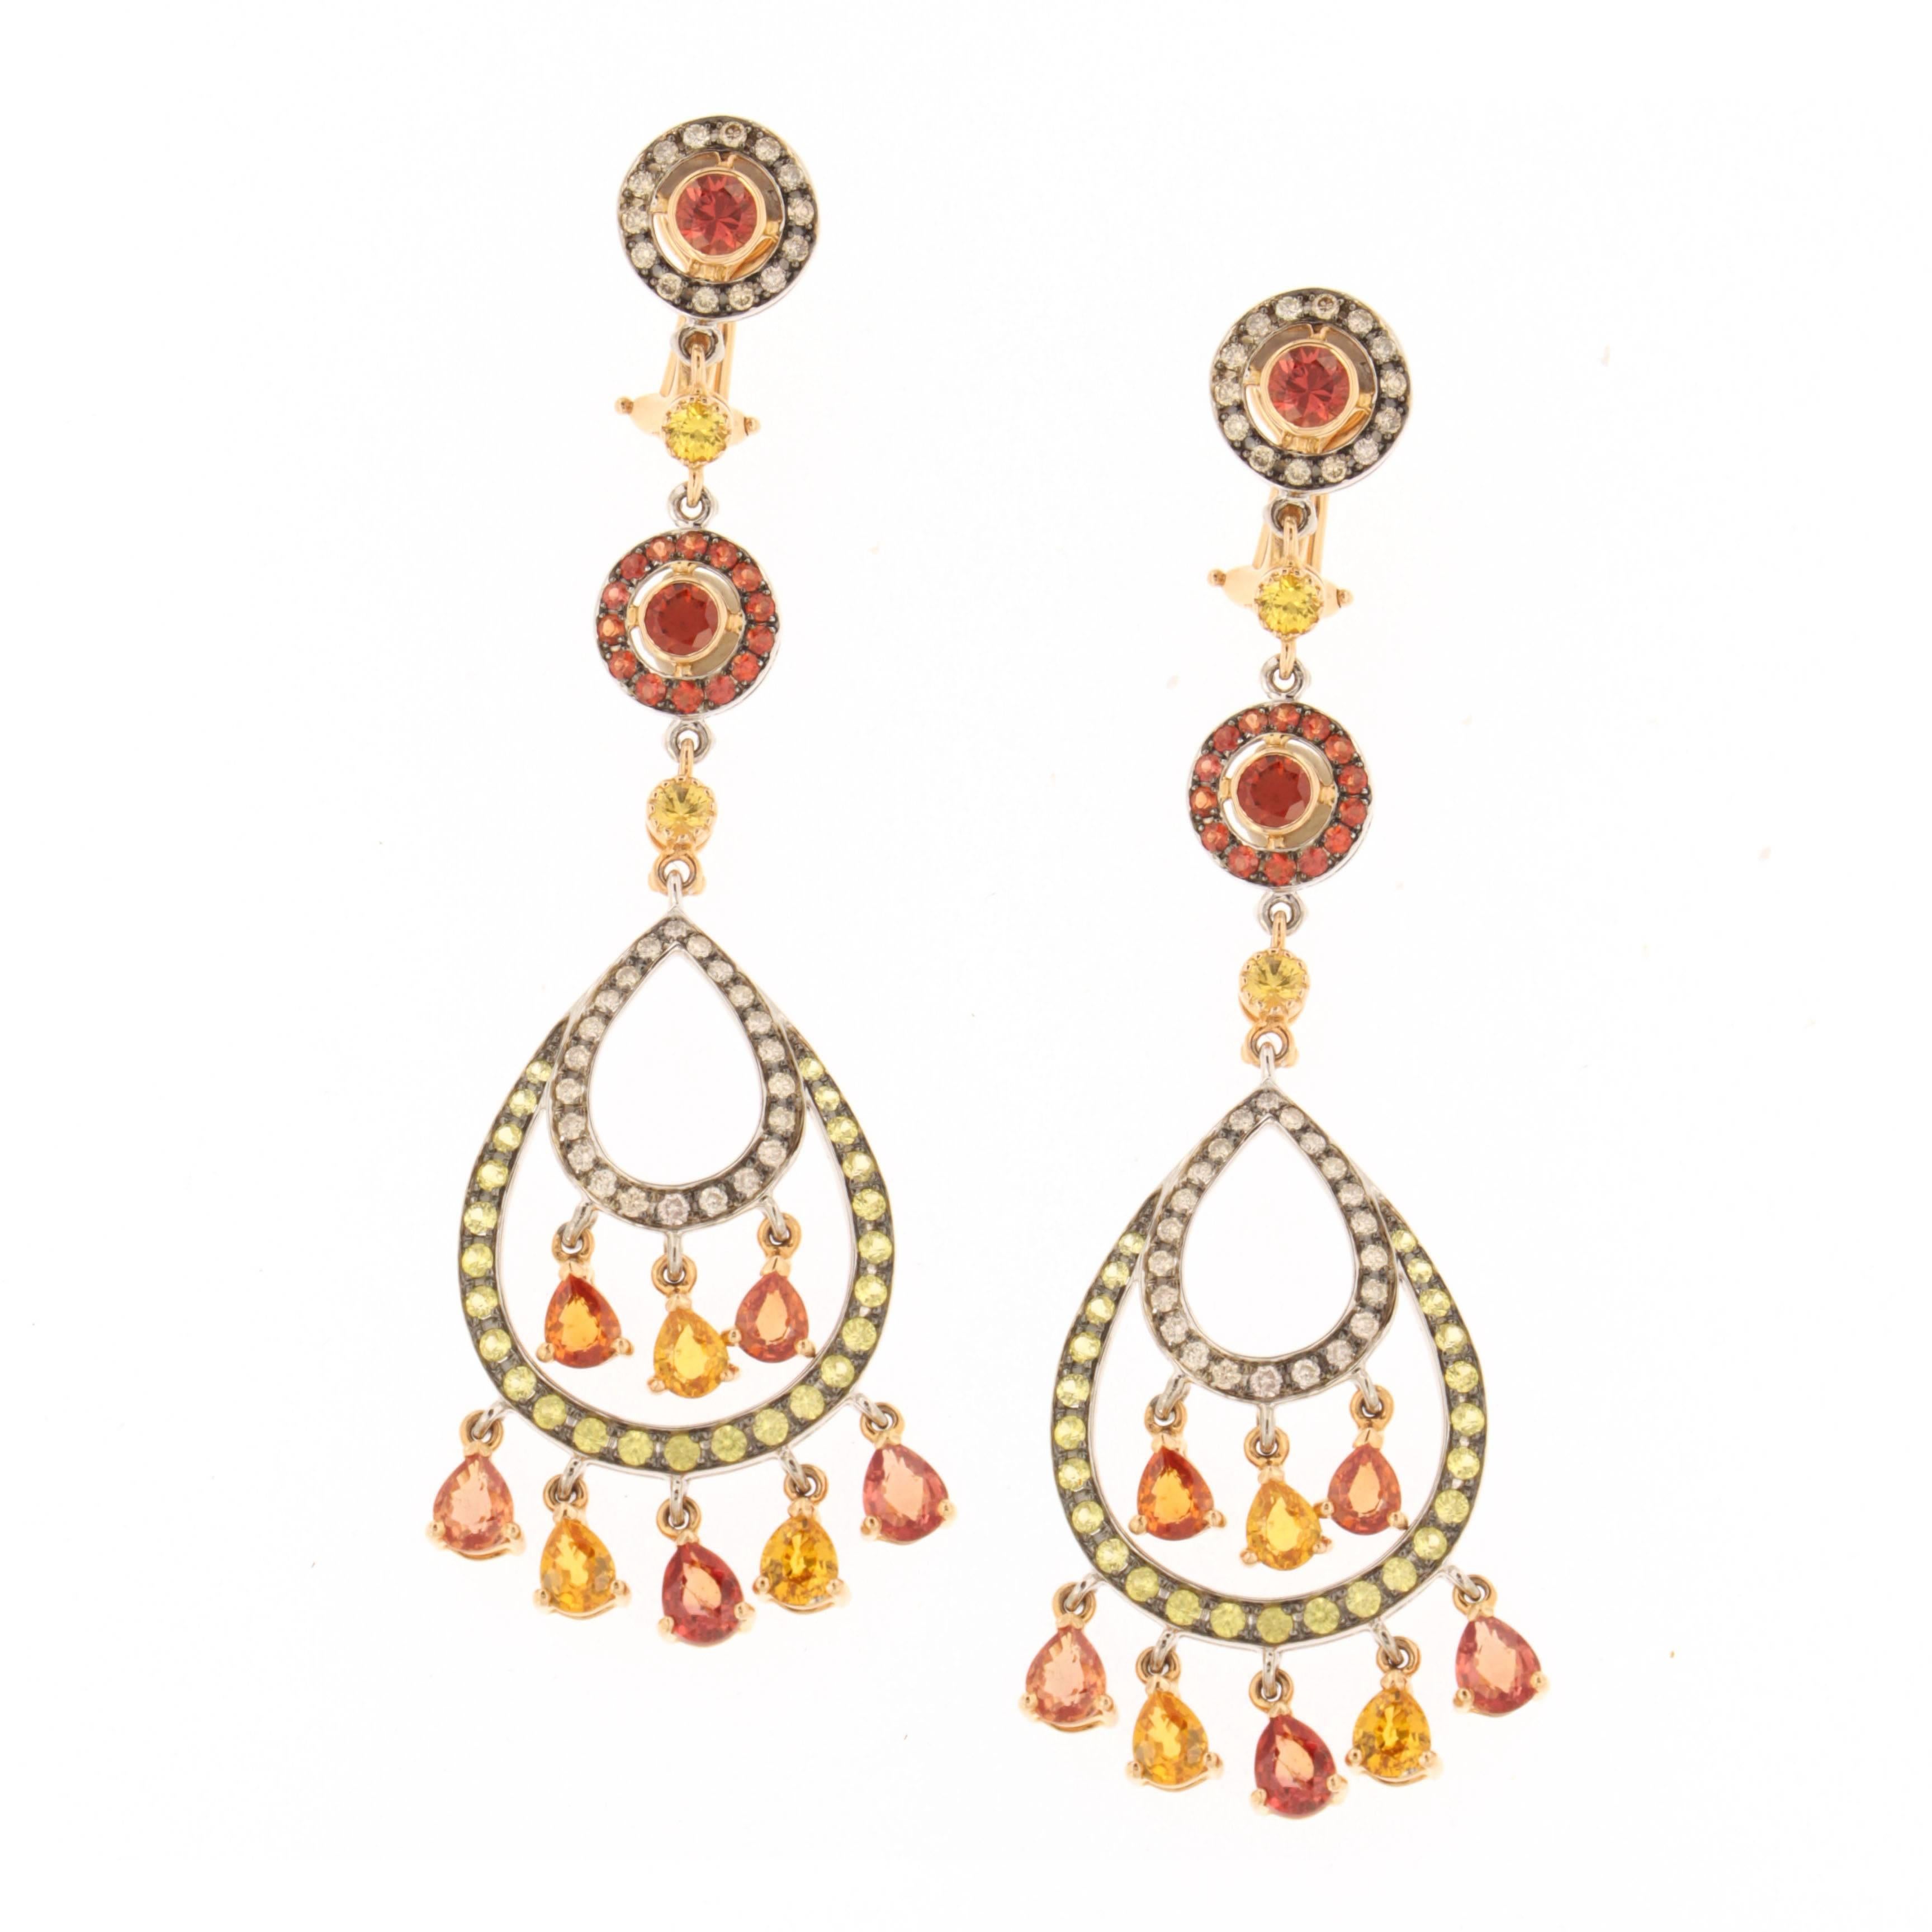 Zorab Creation Feria Earrings in 13 carats of multi-color Sapphires